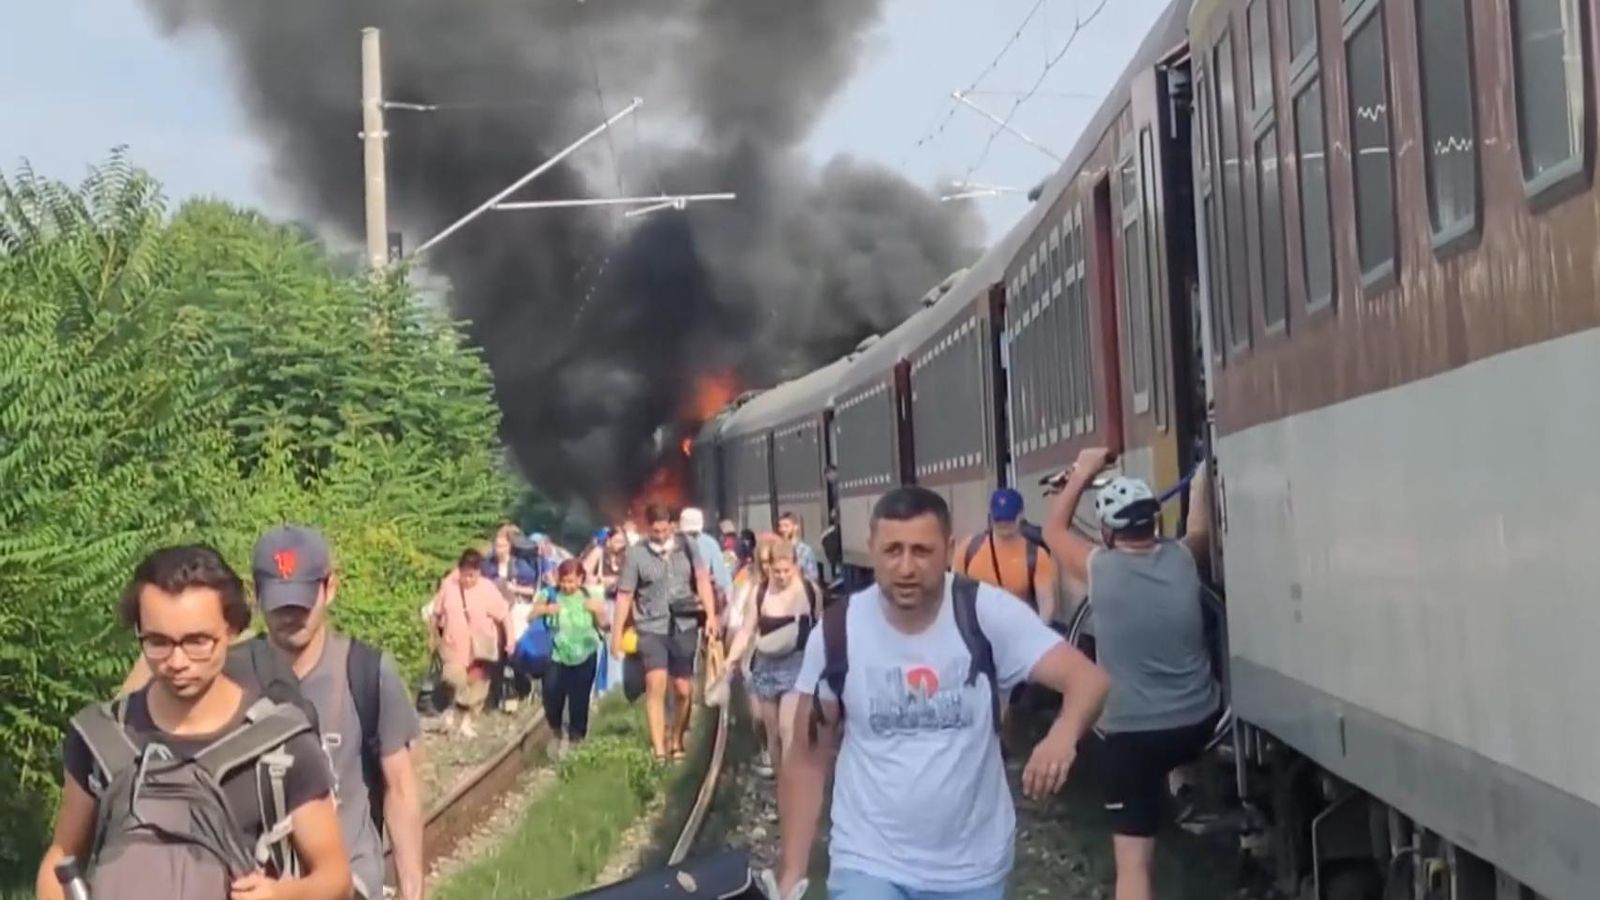 Slovakia: Six people killed after train and bus collide